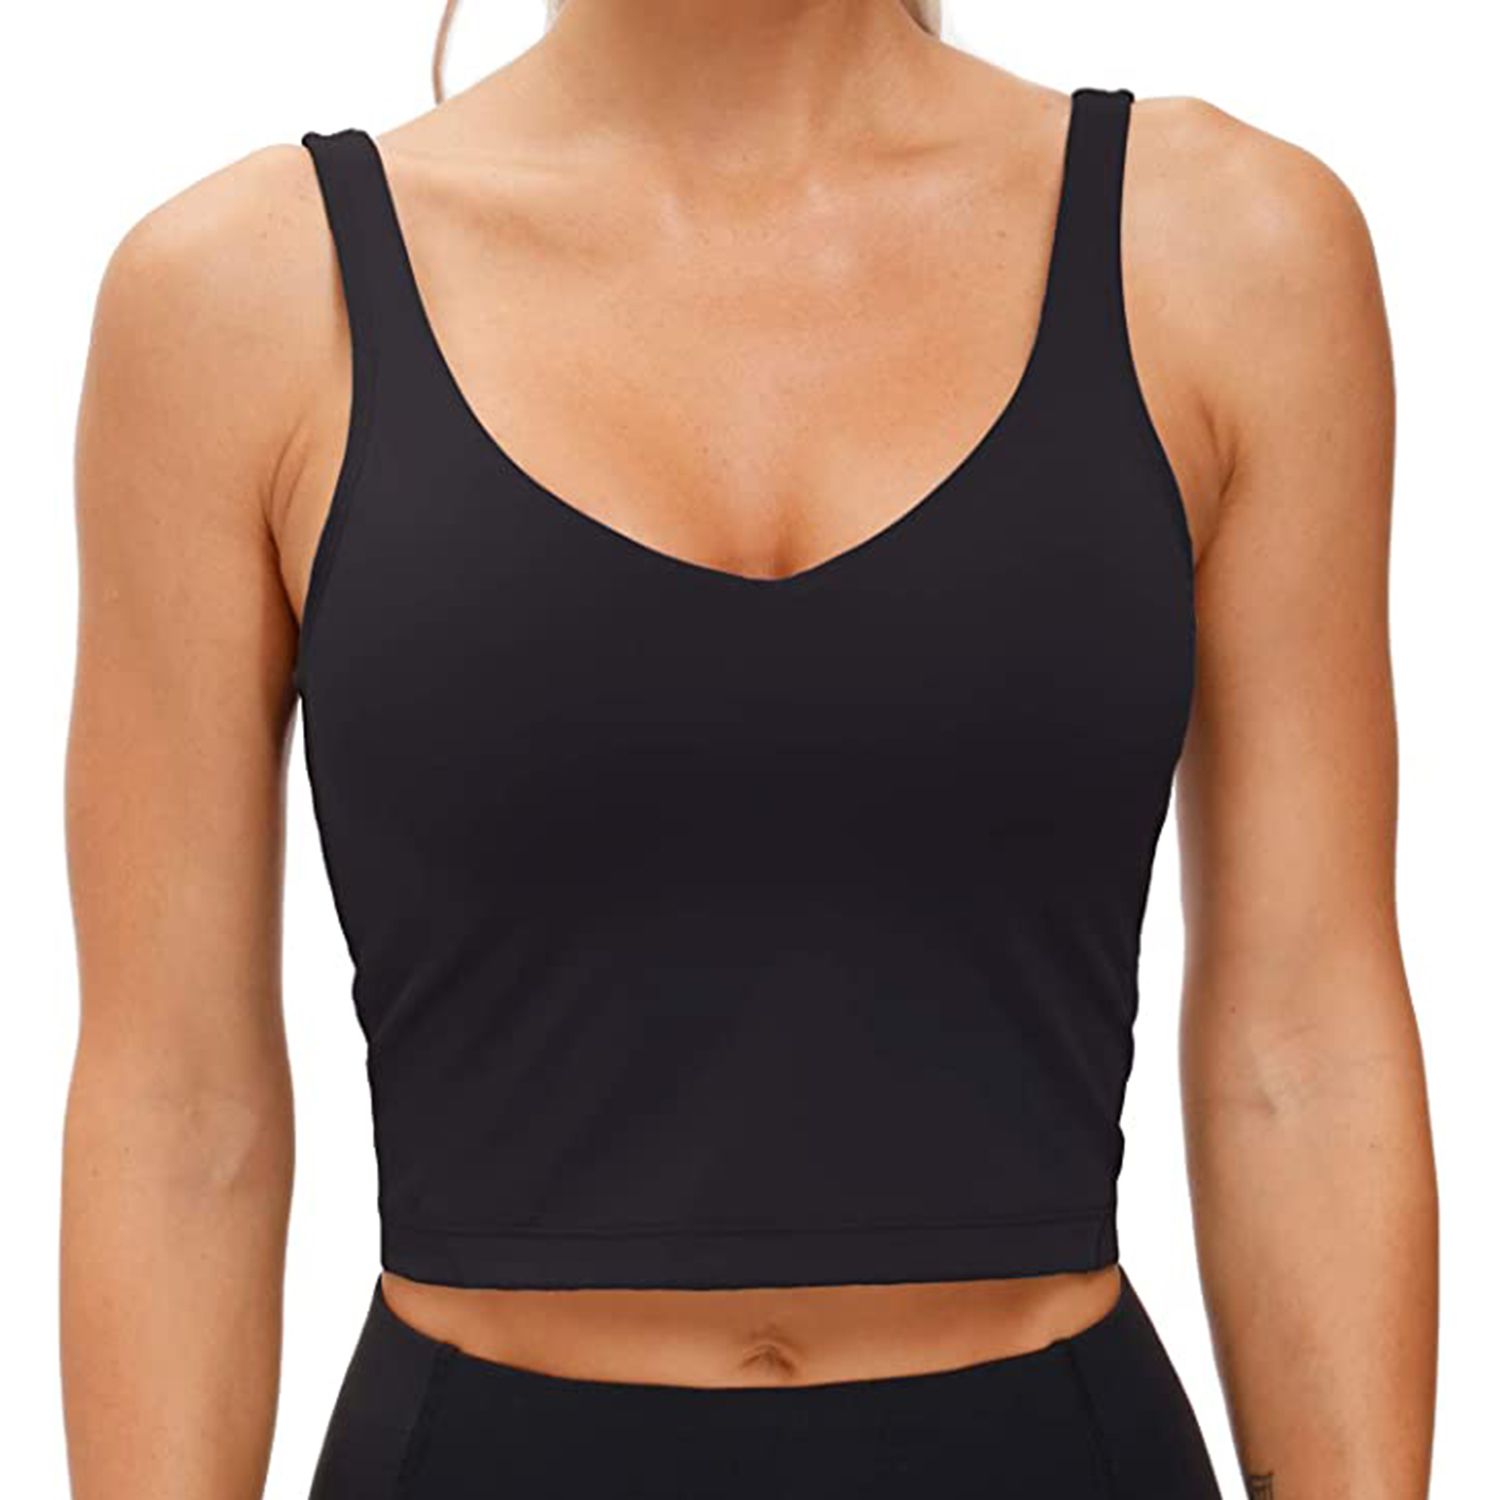 Lrady Womens Yoga Tank Sports Bras Removable Padded Fitness Workout Running Crop Tops